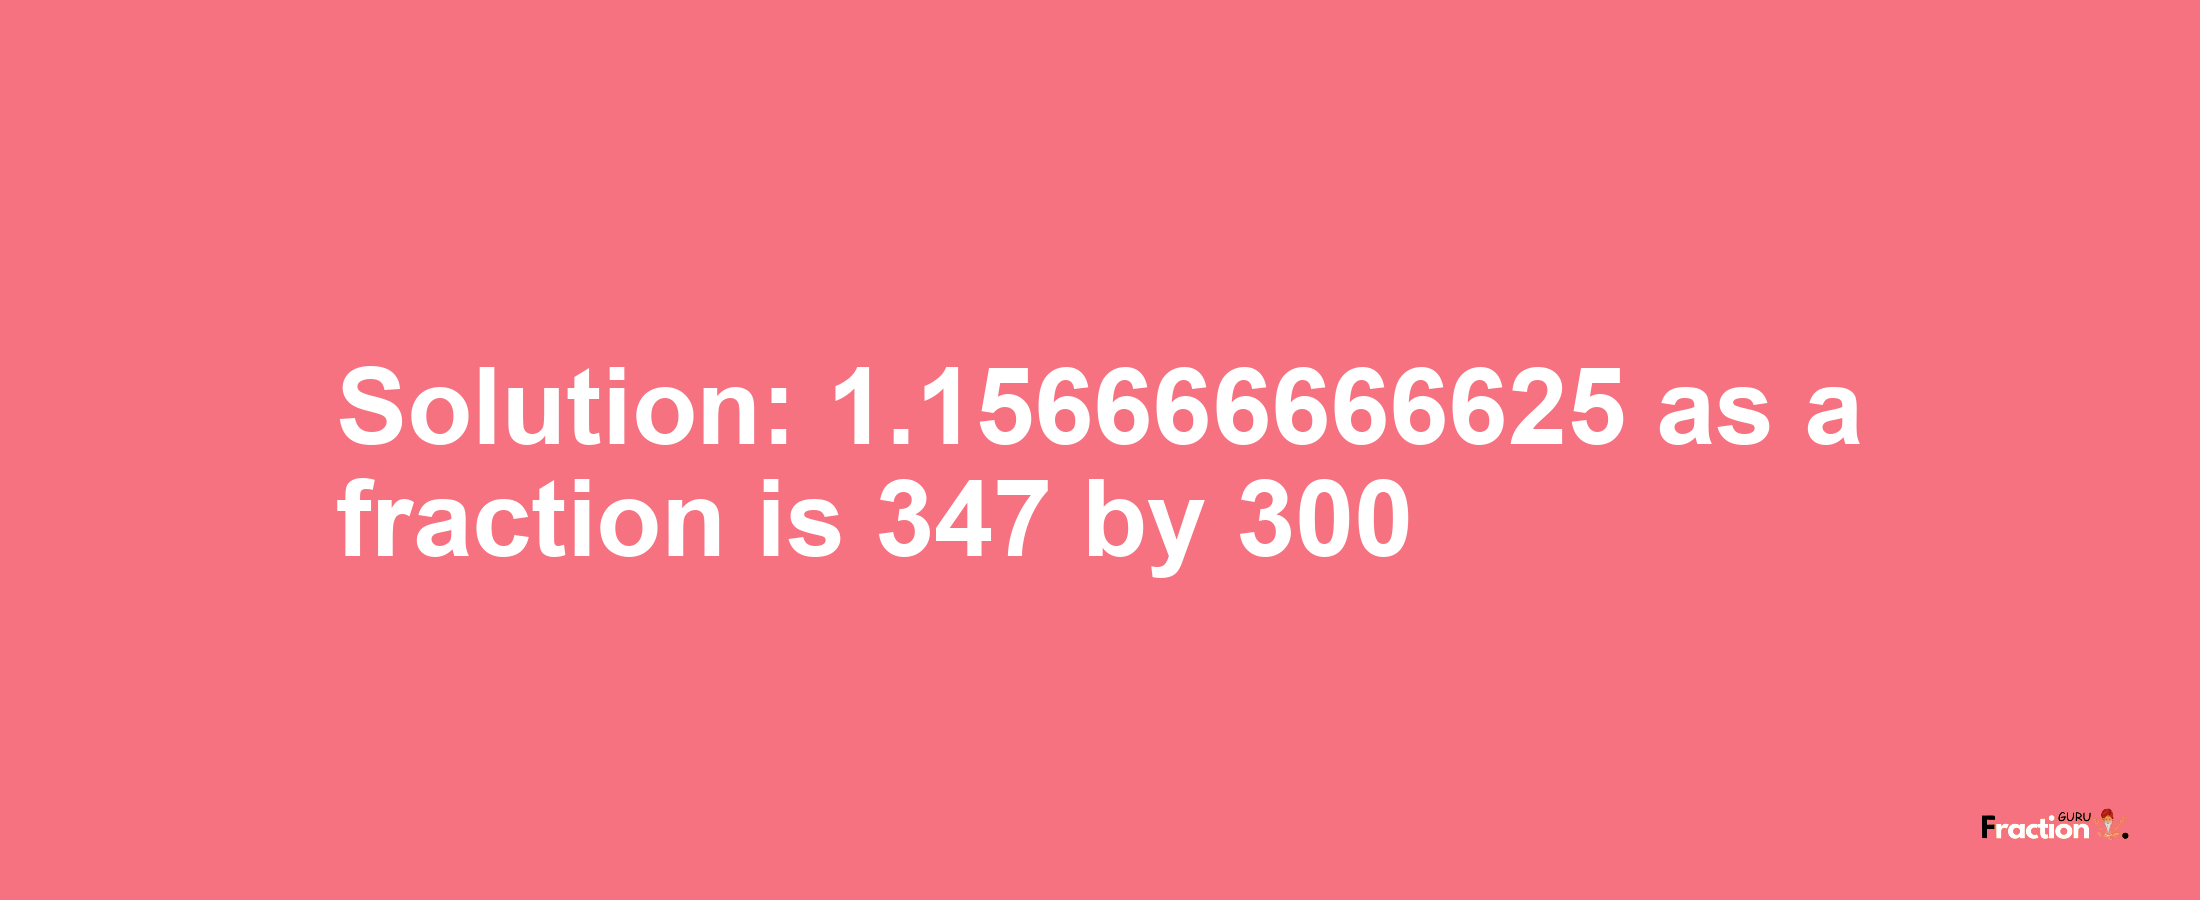 Solution:1.156666666625 as a fraction is 347/300